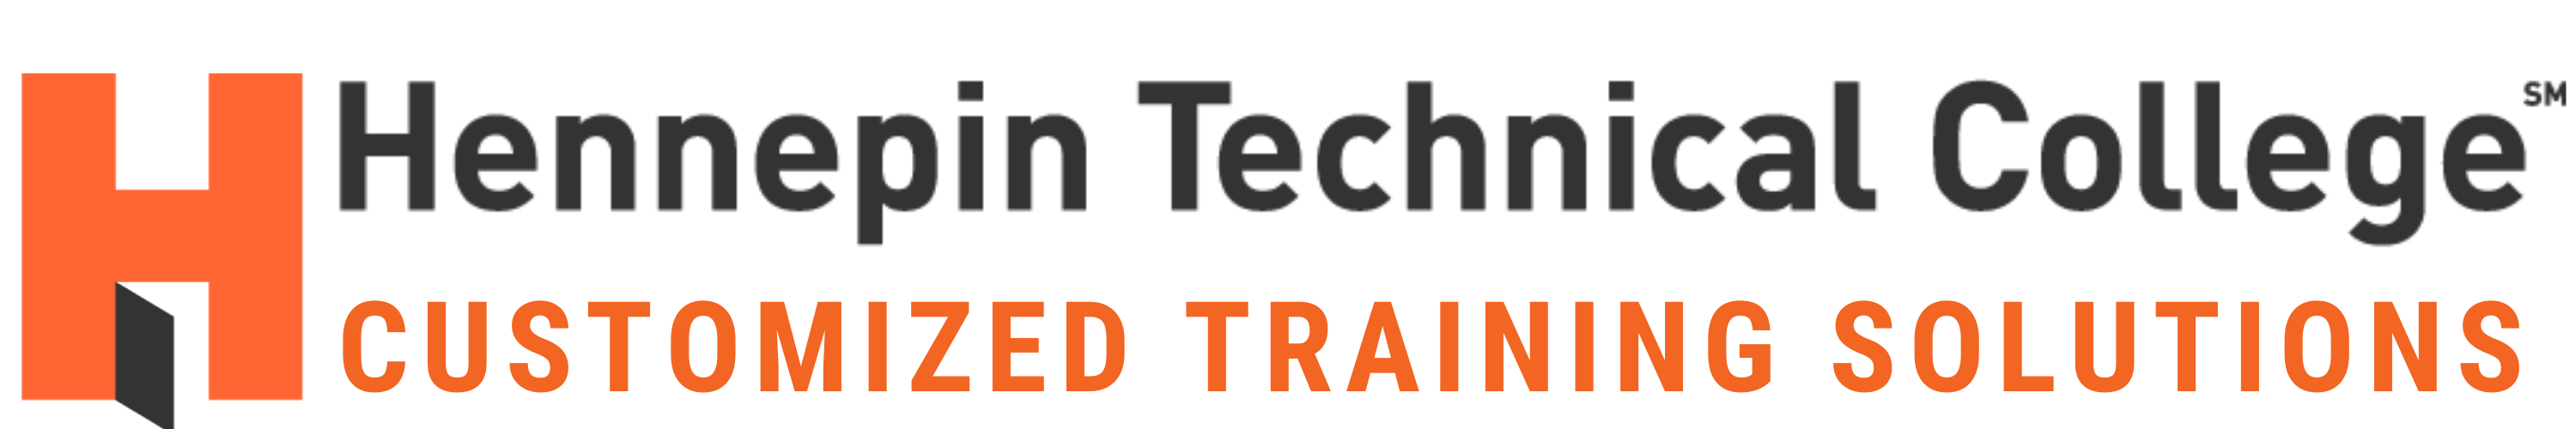 Hennepin Technical College Customized Training Solutions logo